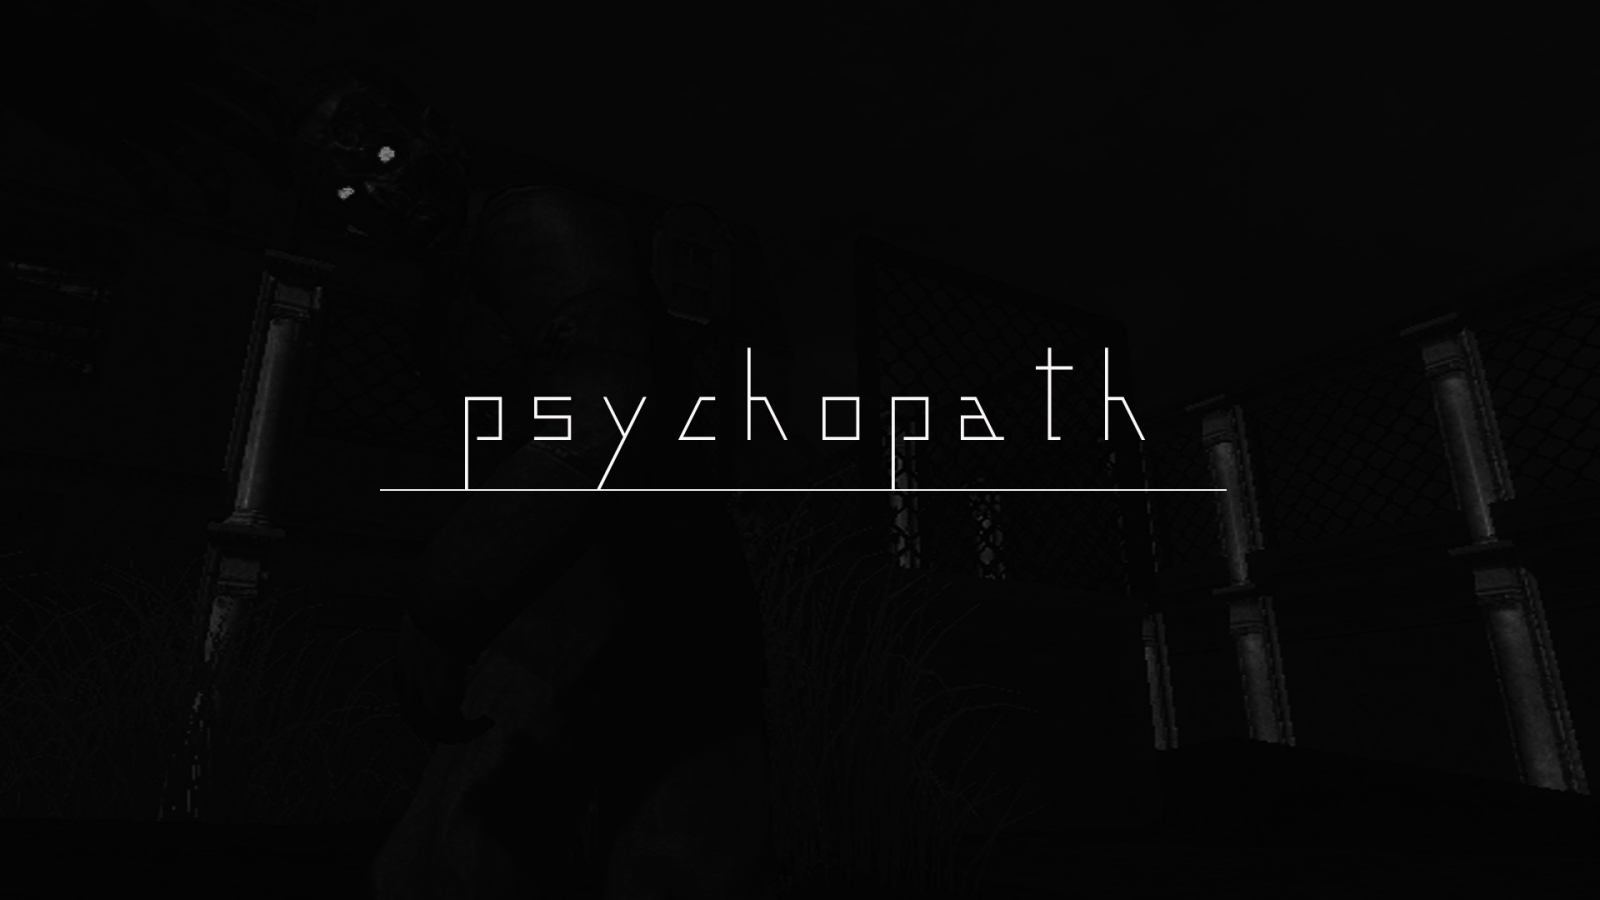 Psychopath Wallpapers